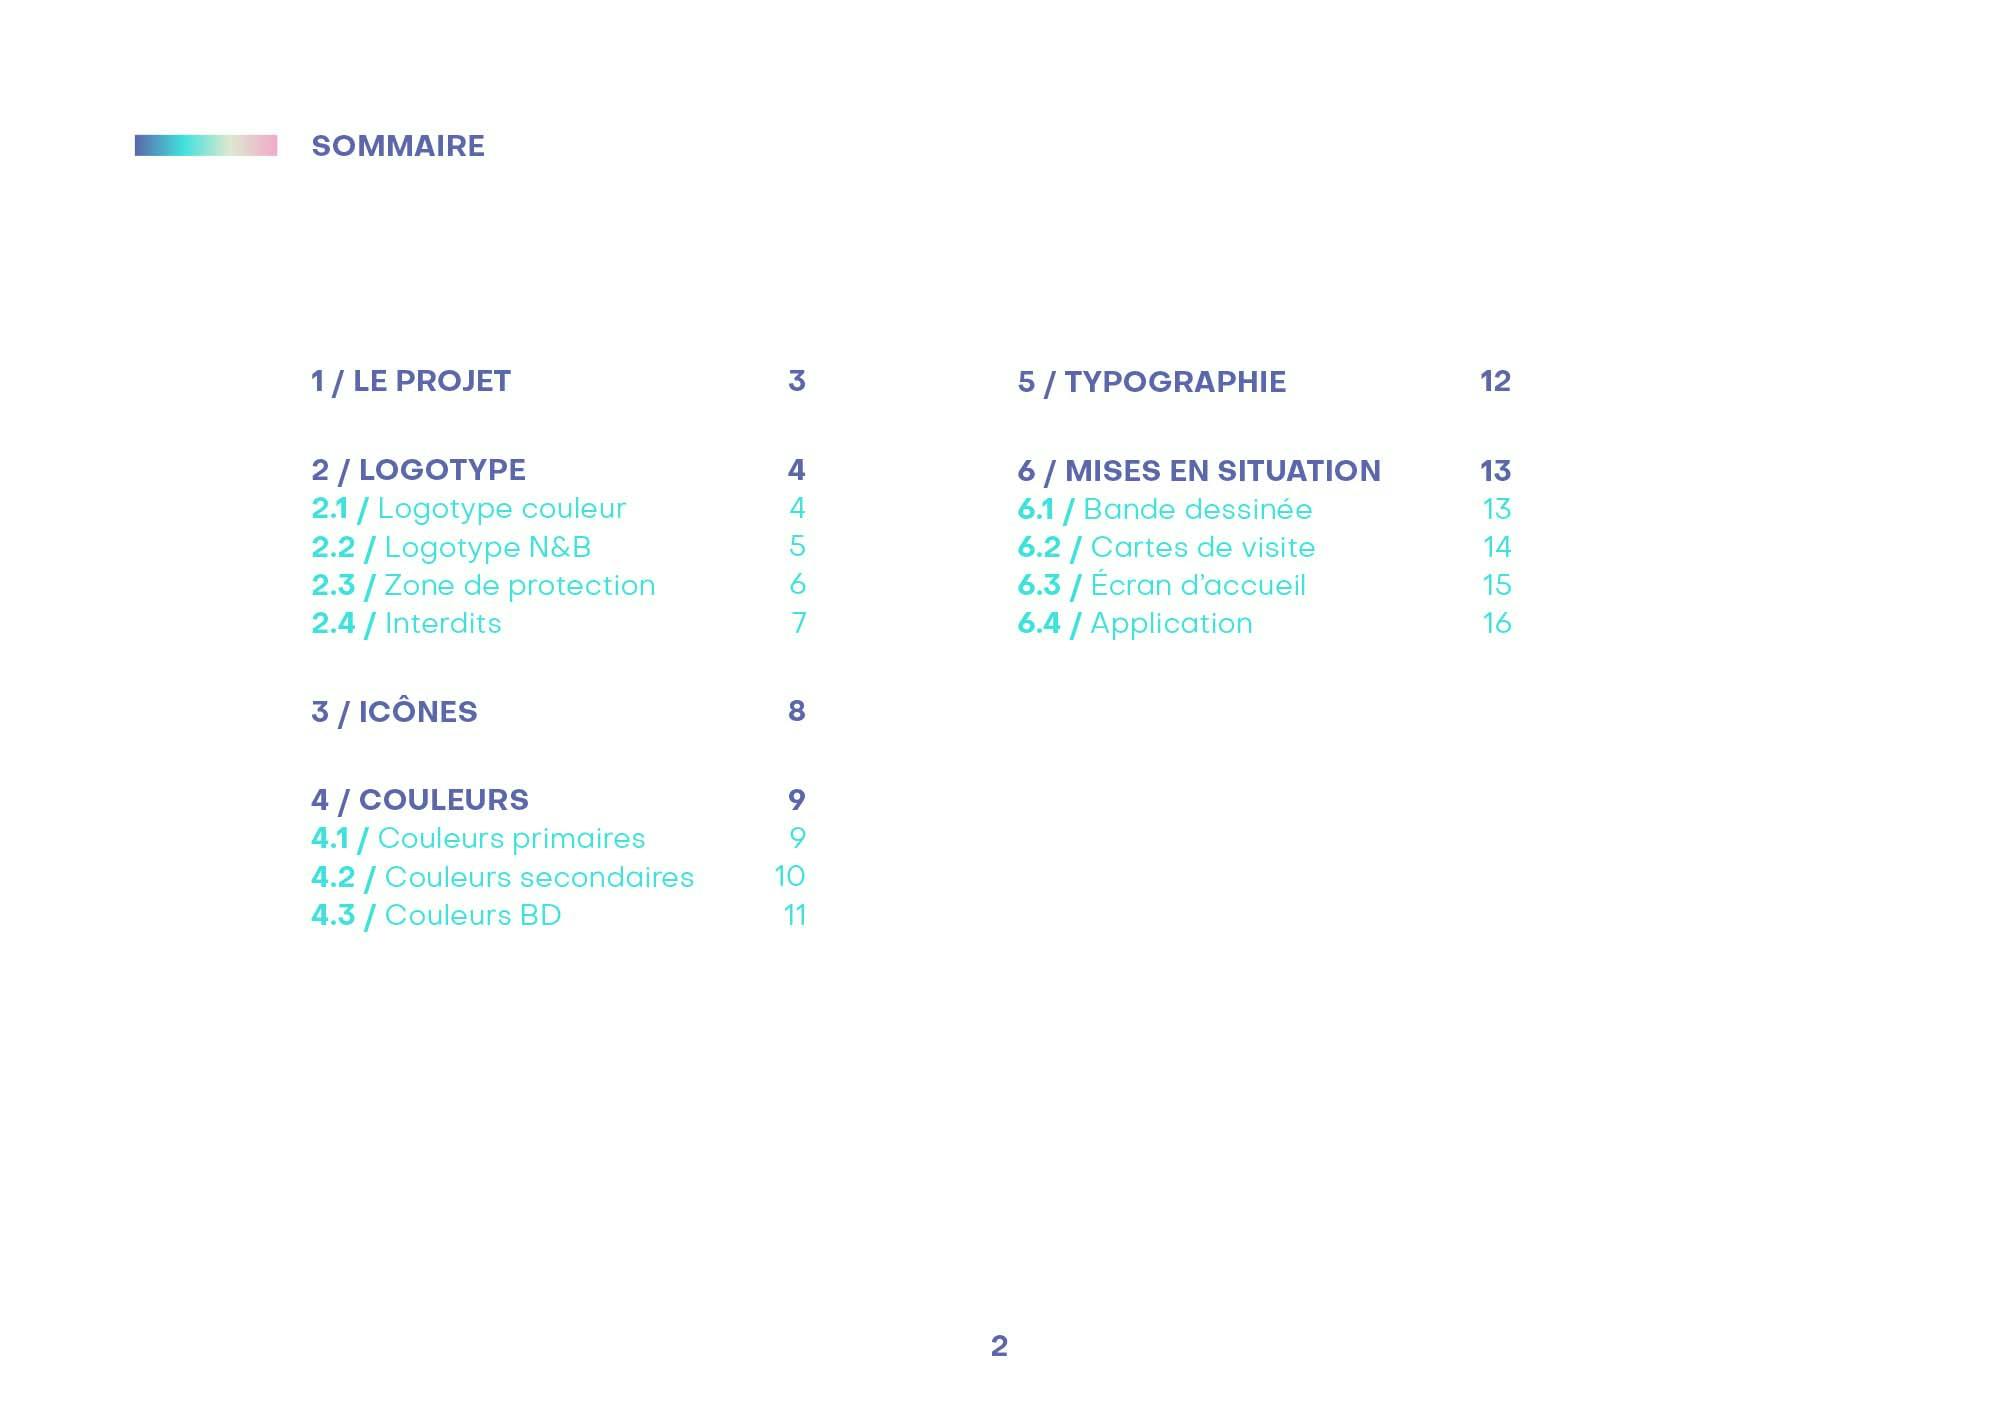 Brand guidelines (Table of contents)